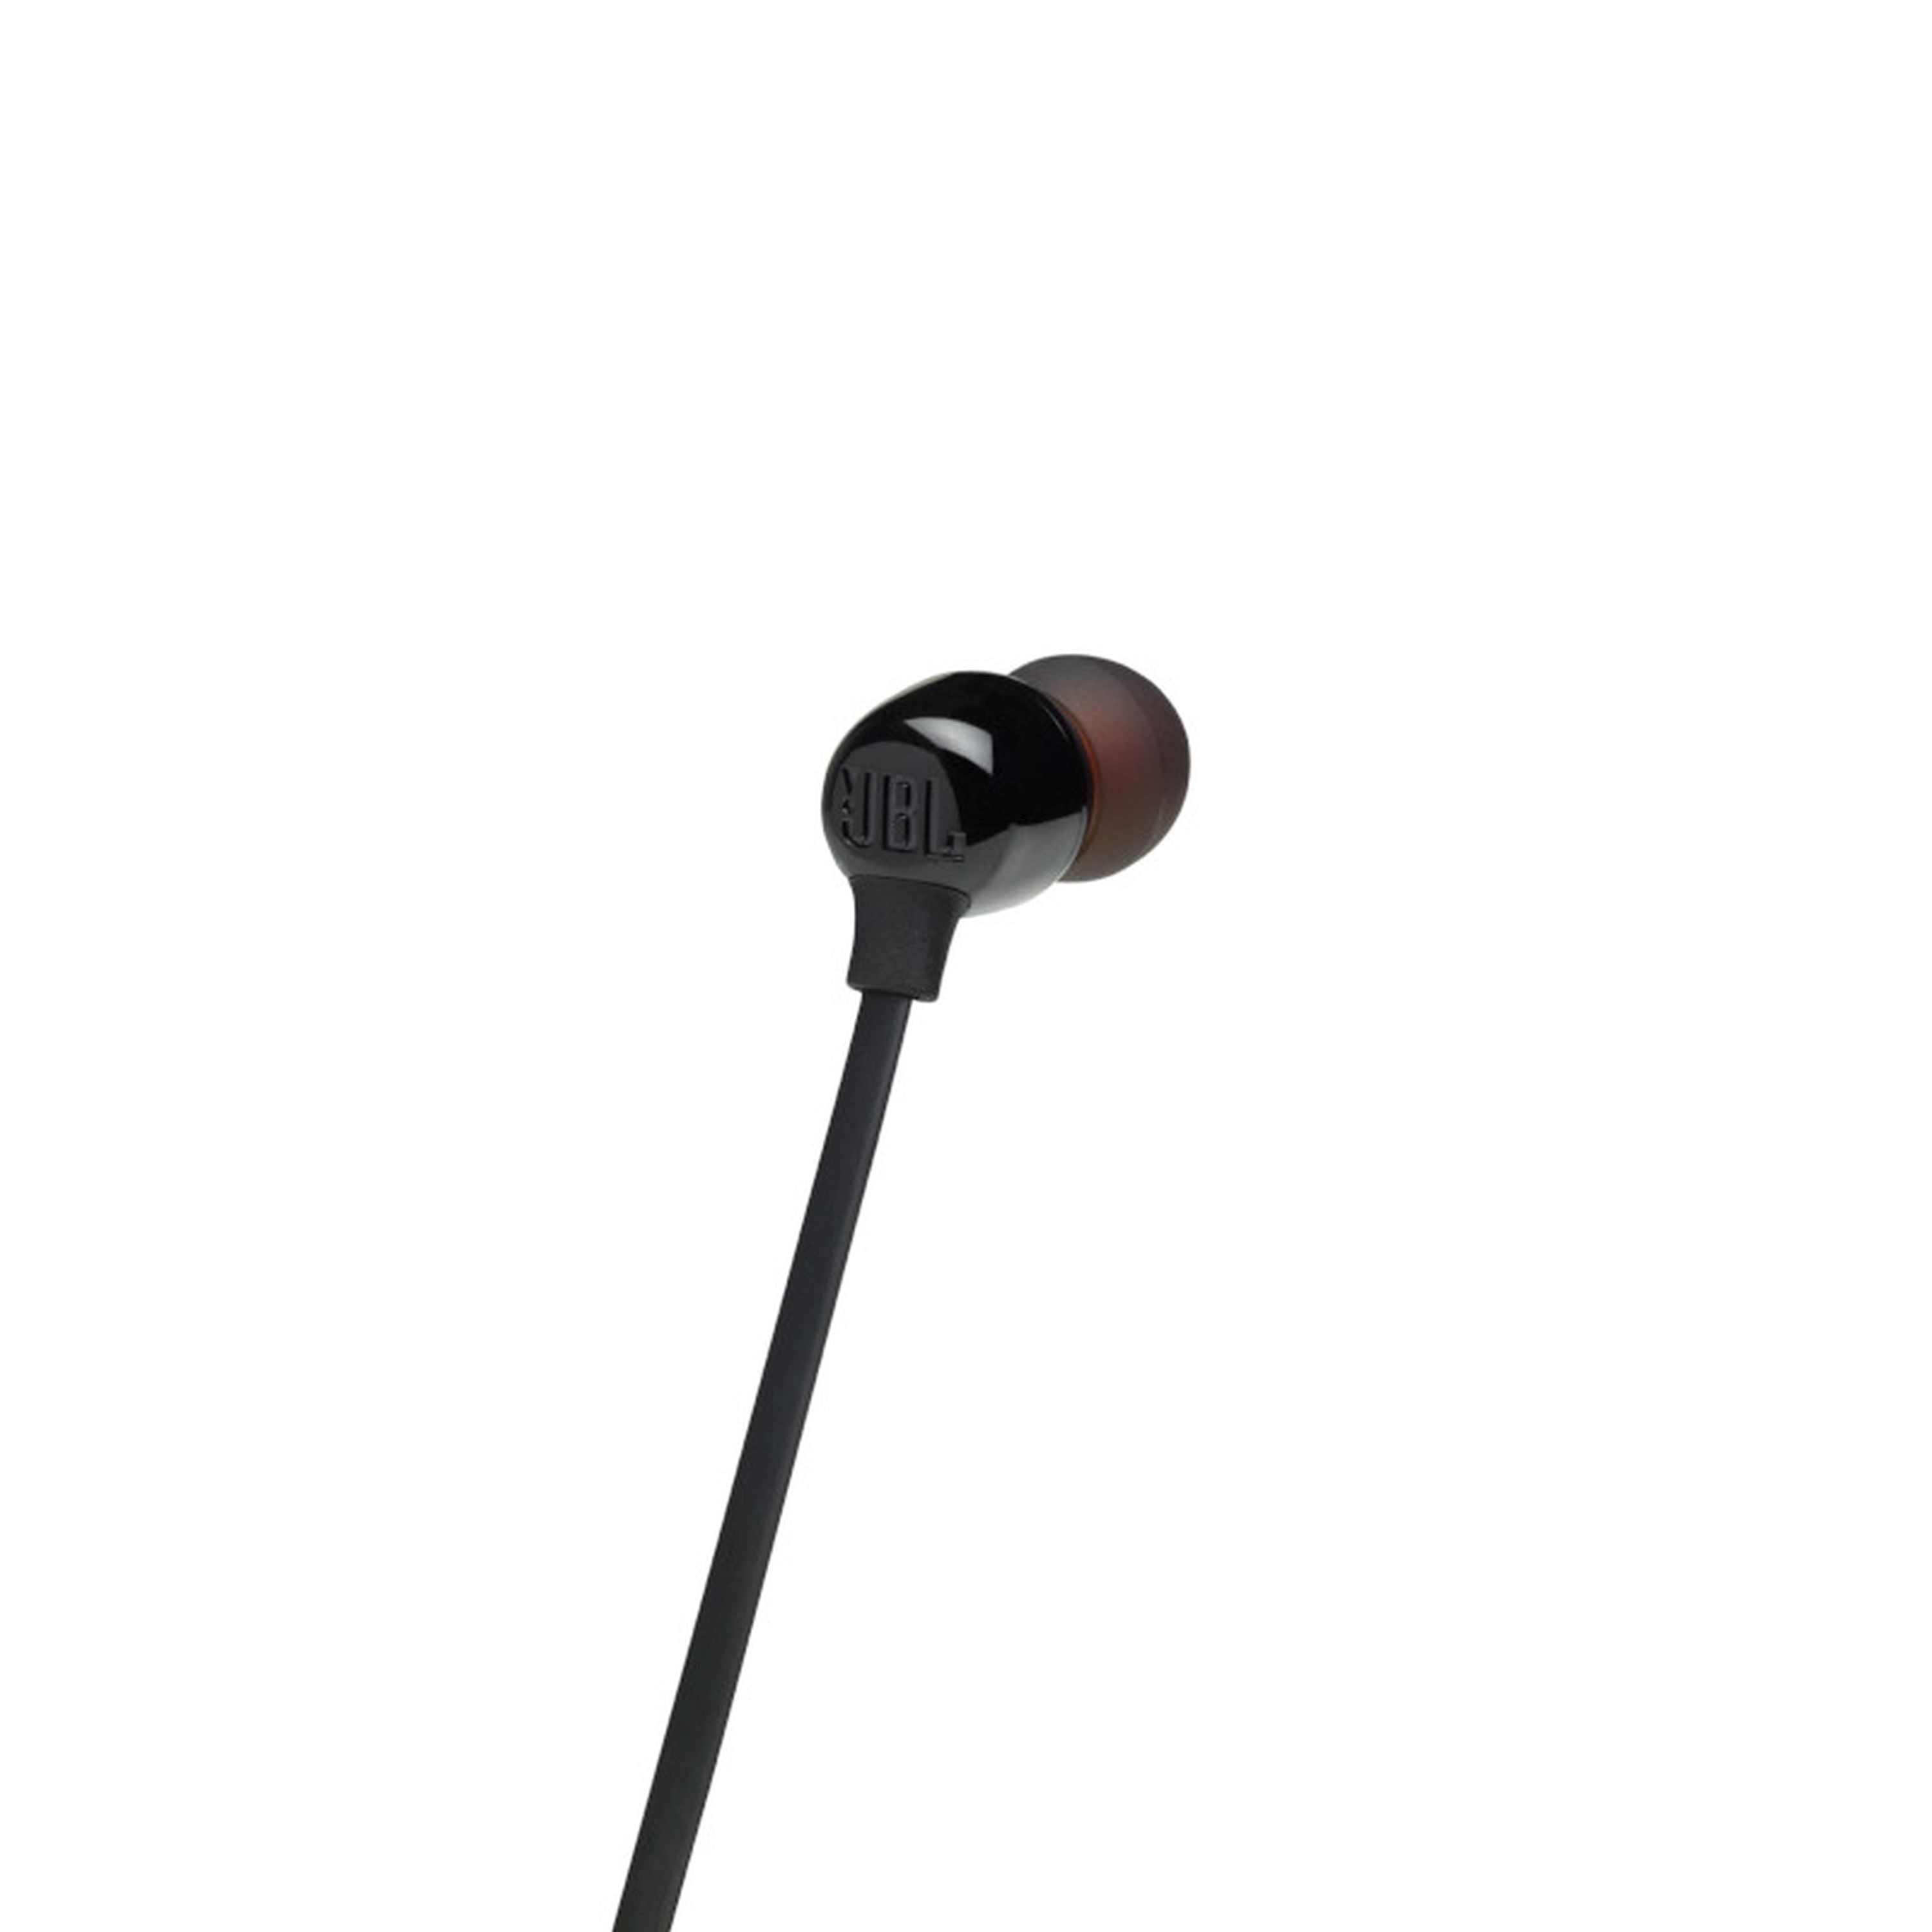 & Black Pure Headphones in department Battery Earbuds | Life Bluetooth - Sound Wireless Headphones at In-Ear Tune JBL 125BT the Bass JBL 16-Hour with